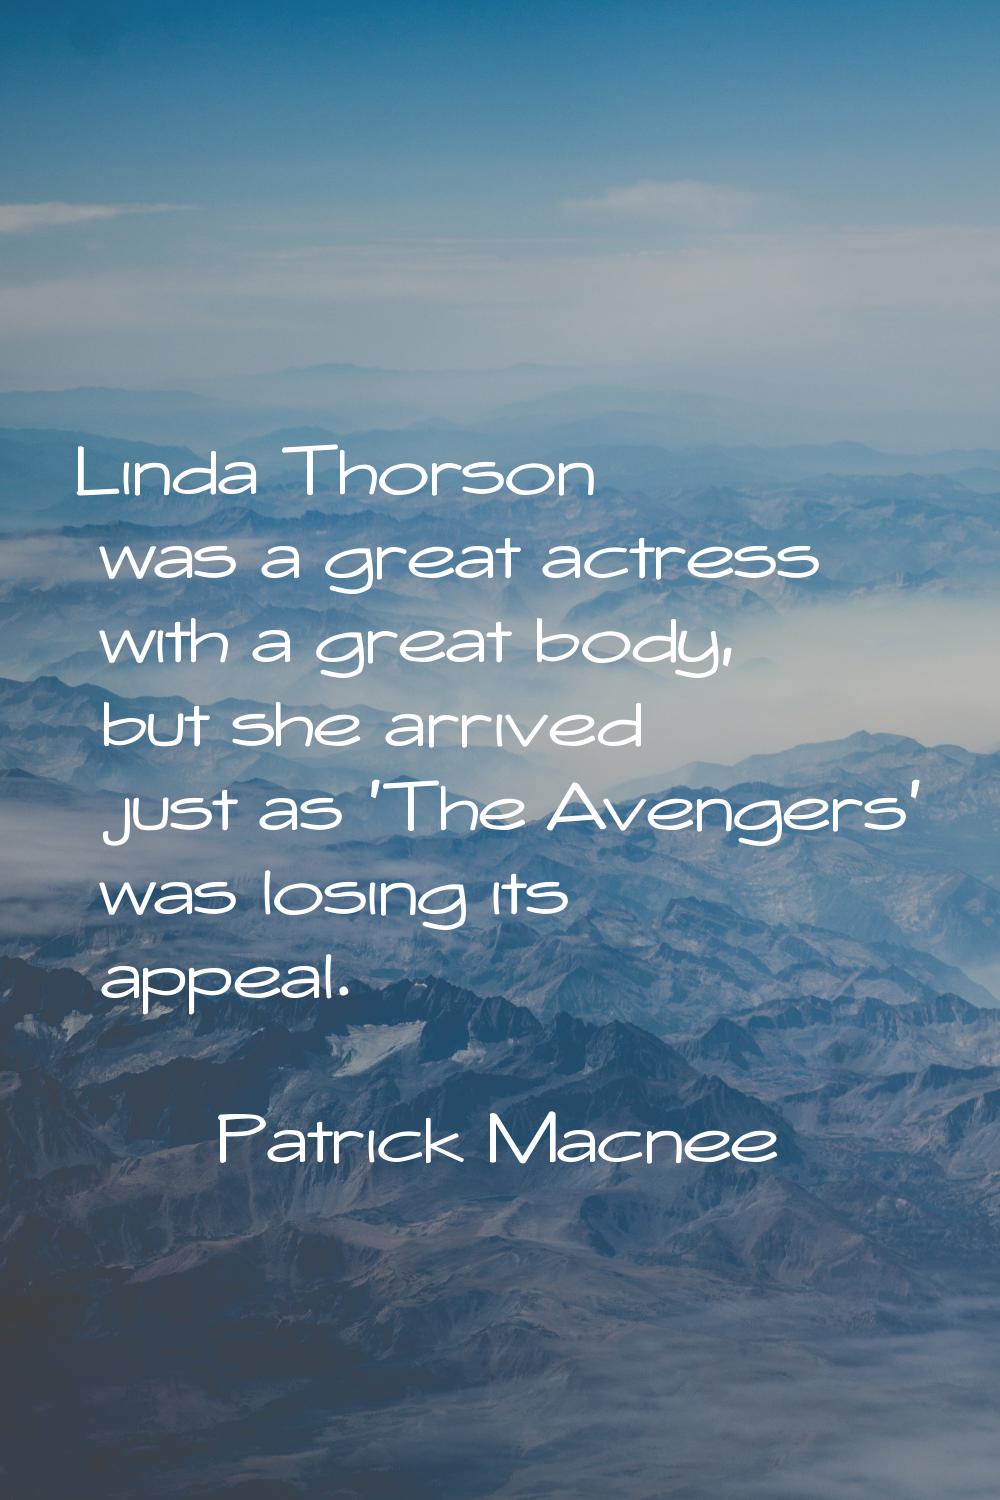 Linda Thorson was a great actress with a great body, but she arrived just as 'The Avengers' was los